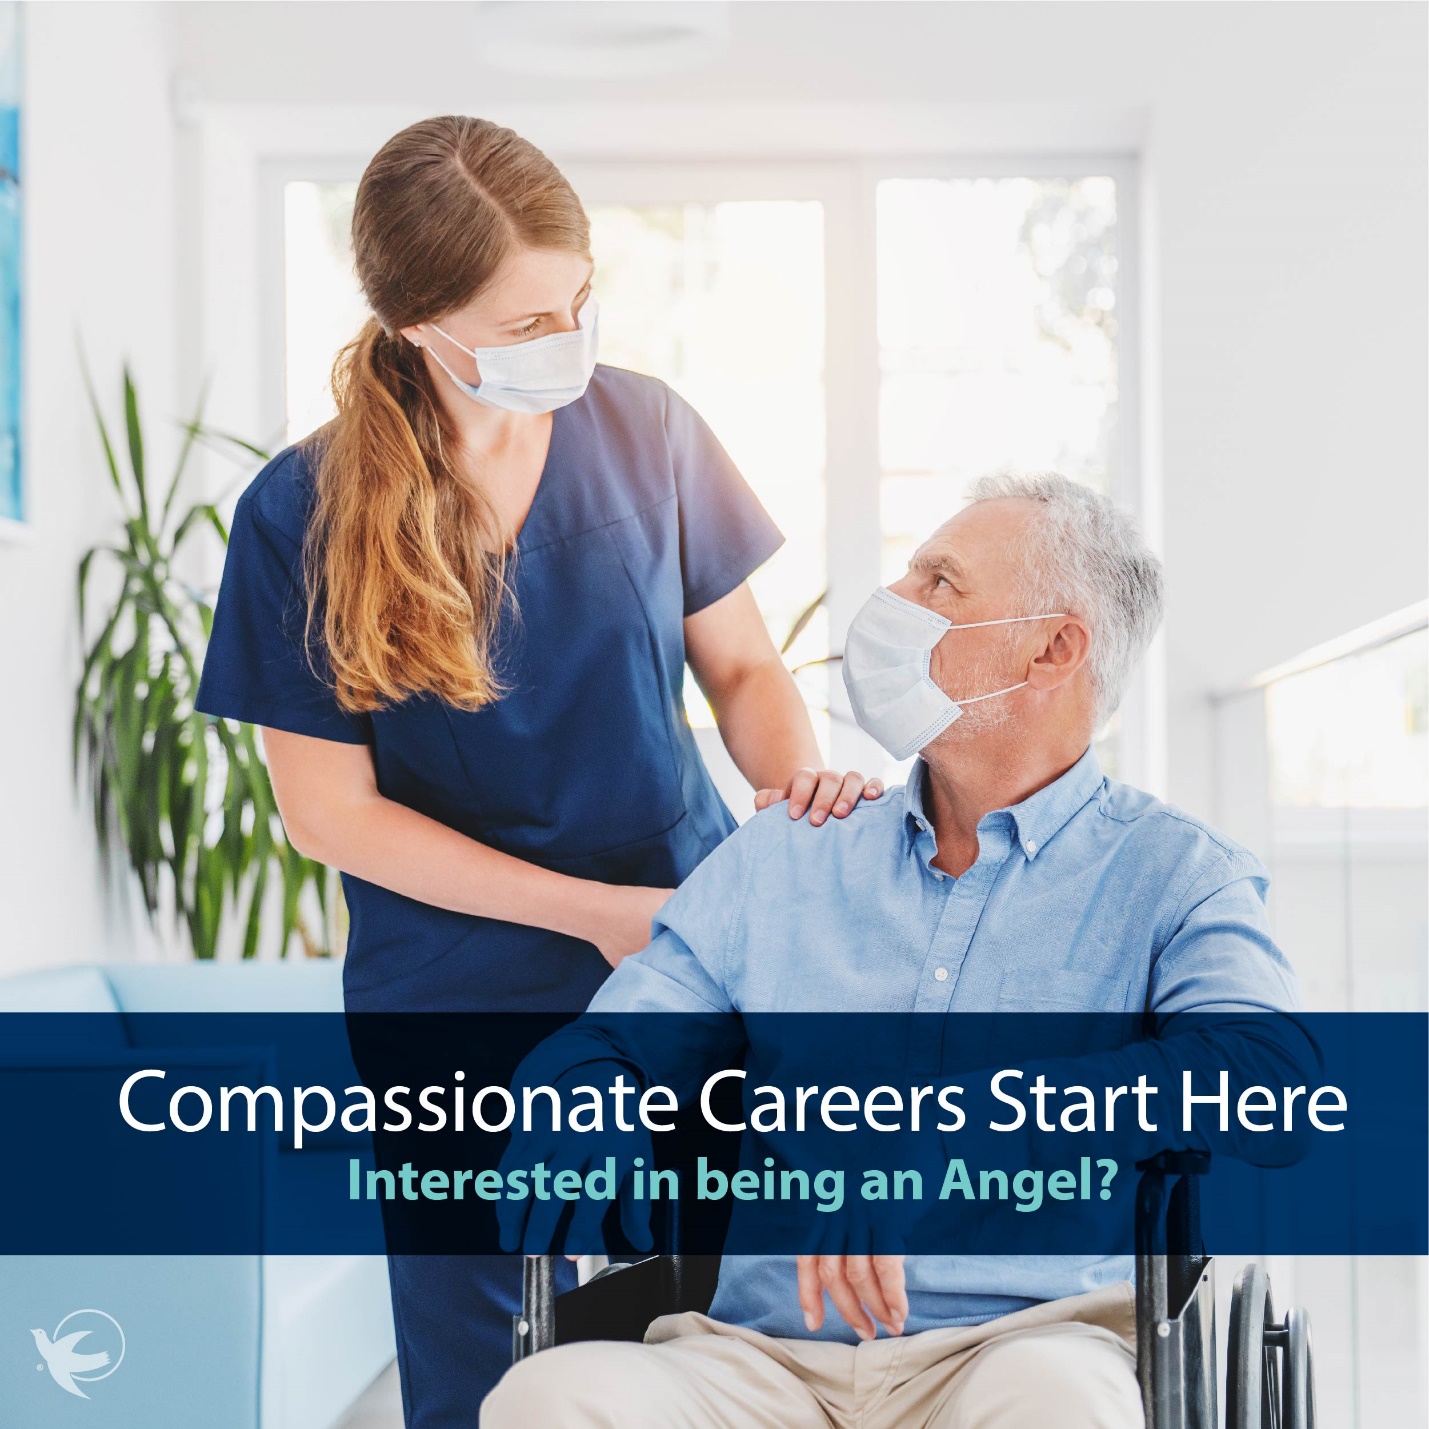 Compassionate Careers Start Here